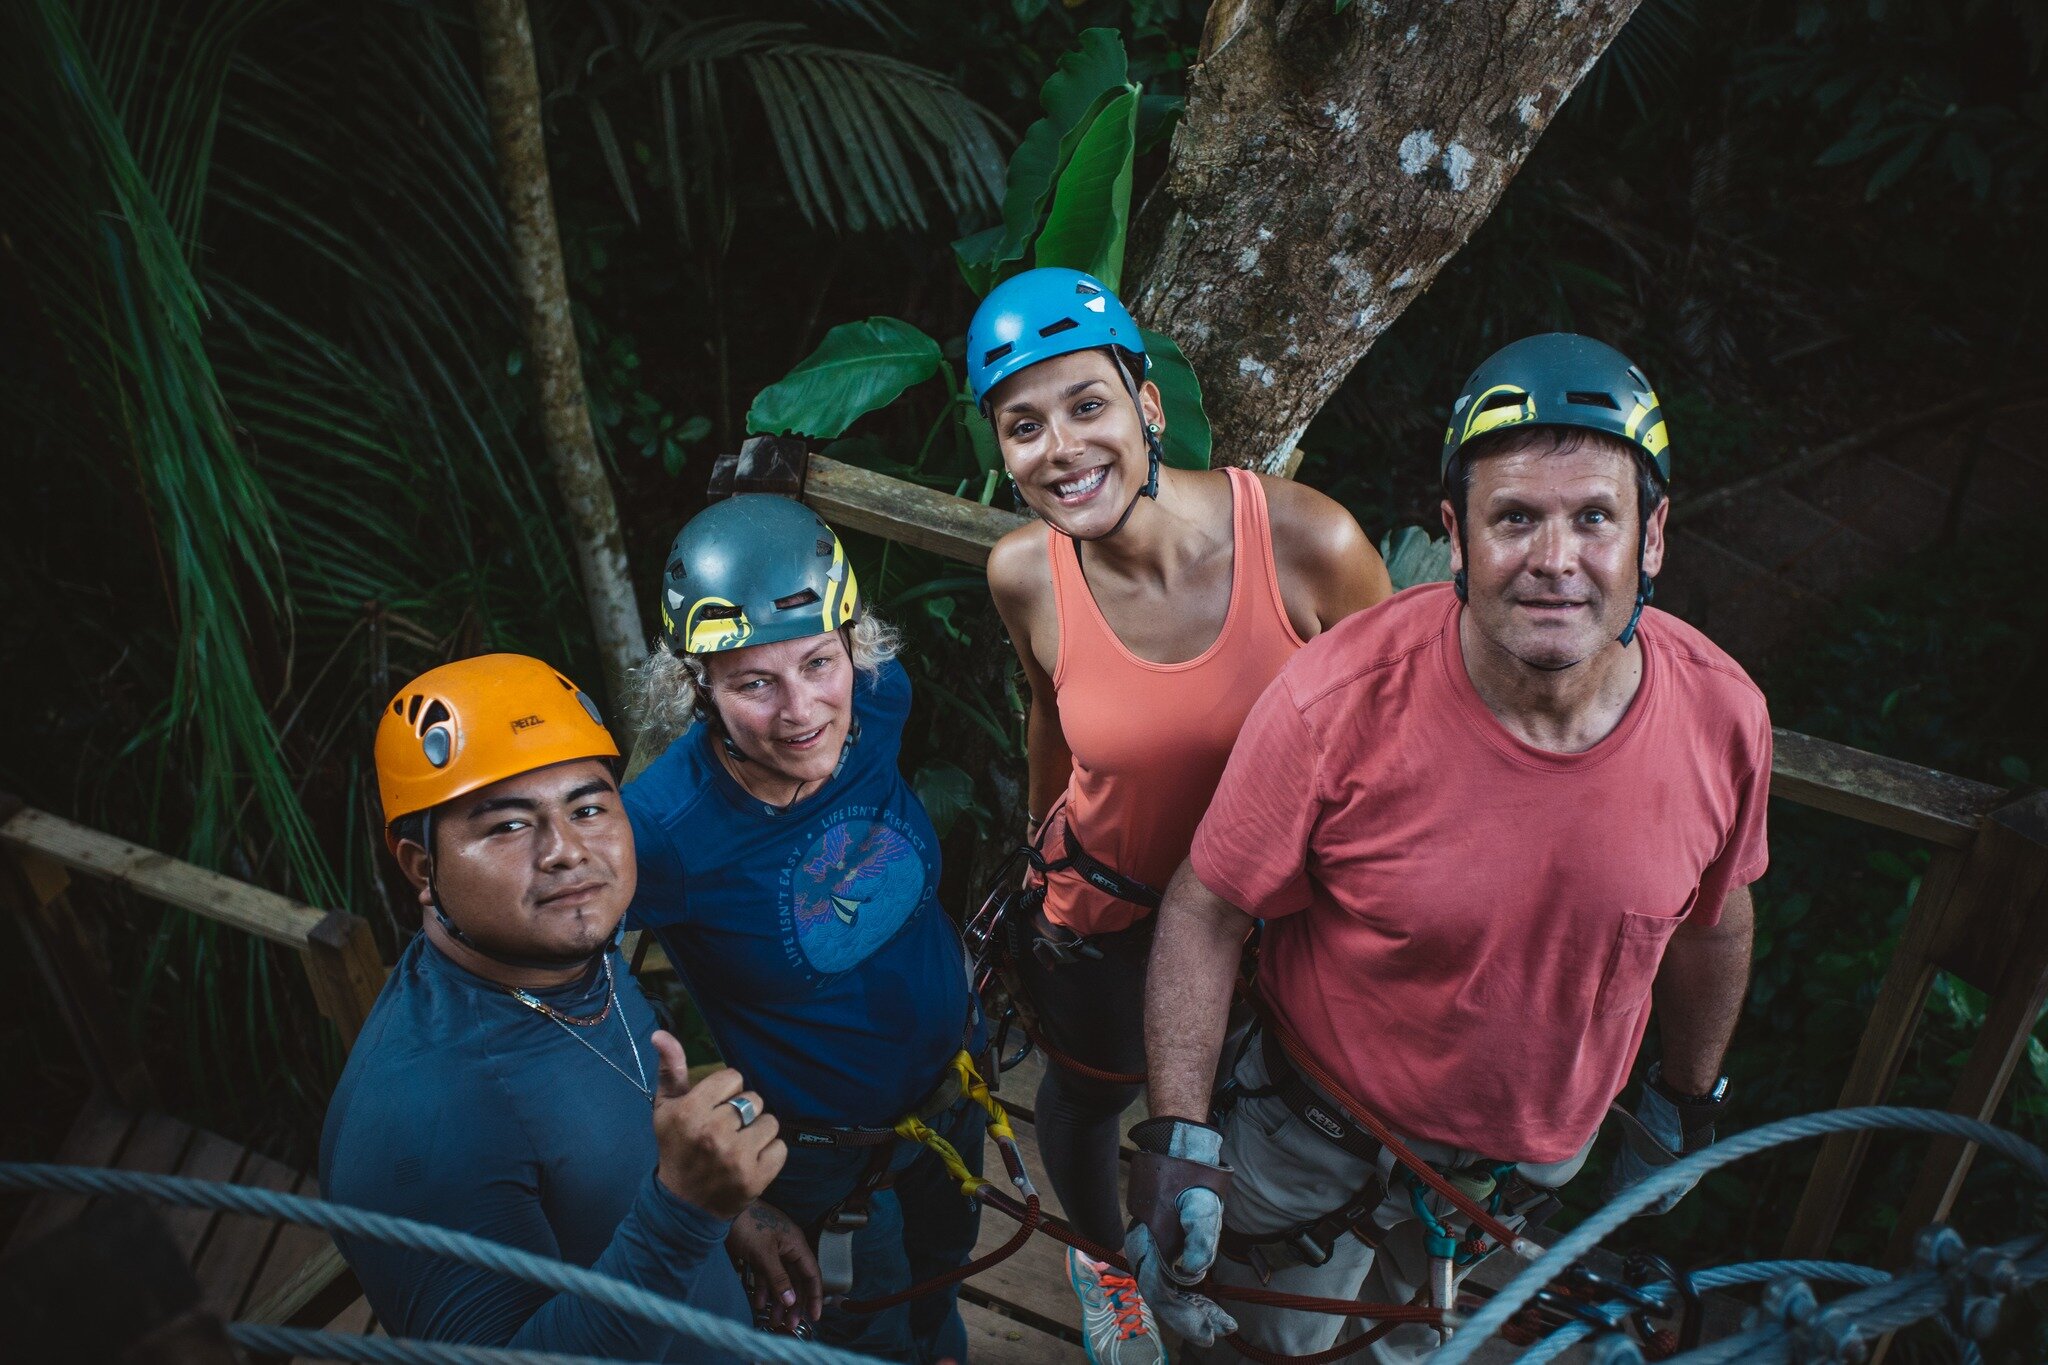 🌟🌿 At Bocawina Rainforest Resort and Adventures, the jungle is our playground. Get ready to hike through lush trails, rappel down stunning waterfalls, zip through the treetops, and swim in the serene waters of natural falls. 

Every moment here is 